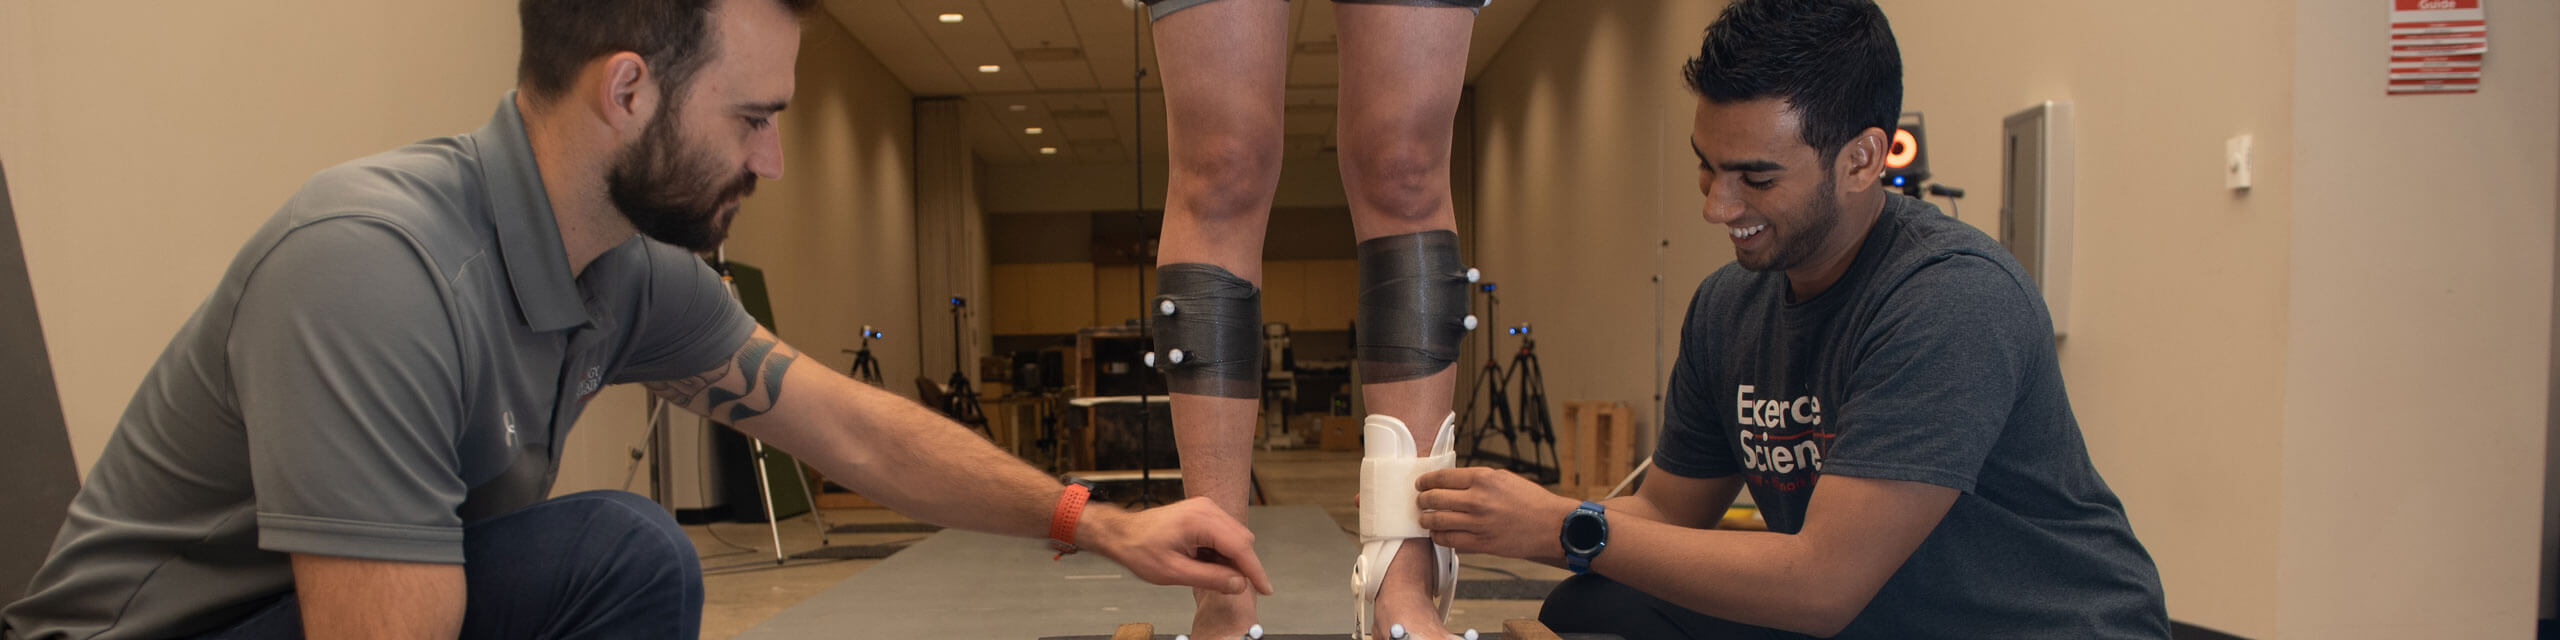 Graduate students use a piece of equipment on a patient's ankle.